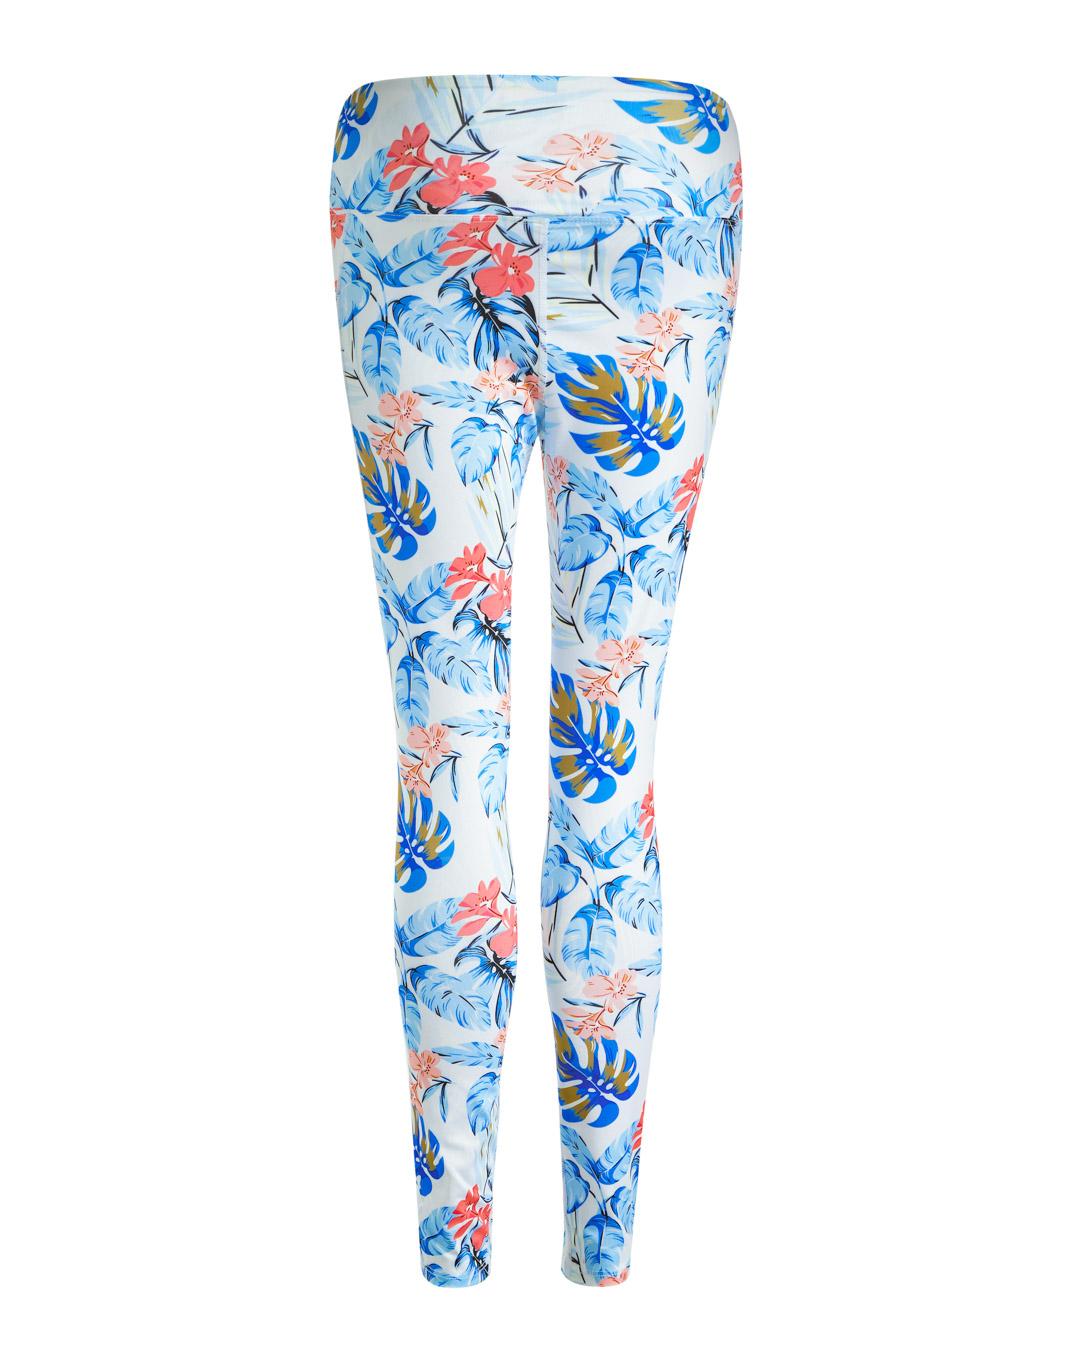 Tropical Print Sports Leggings With Phone Pocket